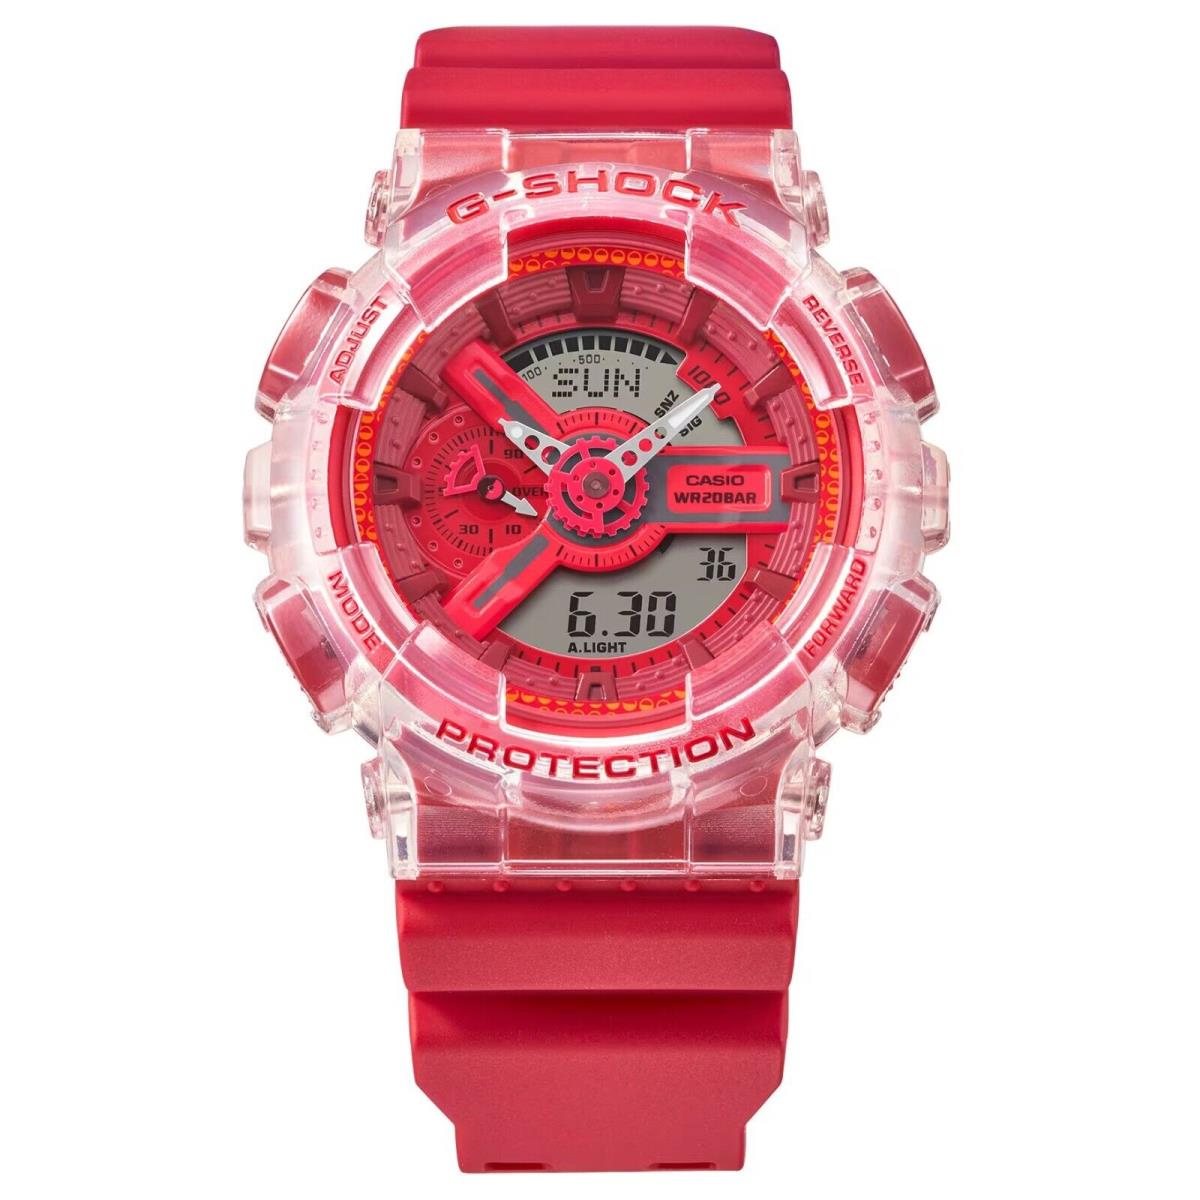 Casio G-shock GA110GL-4A Luck Drop Red Limited Edition Watch